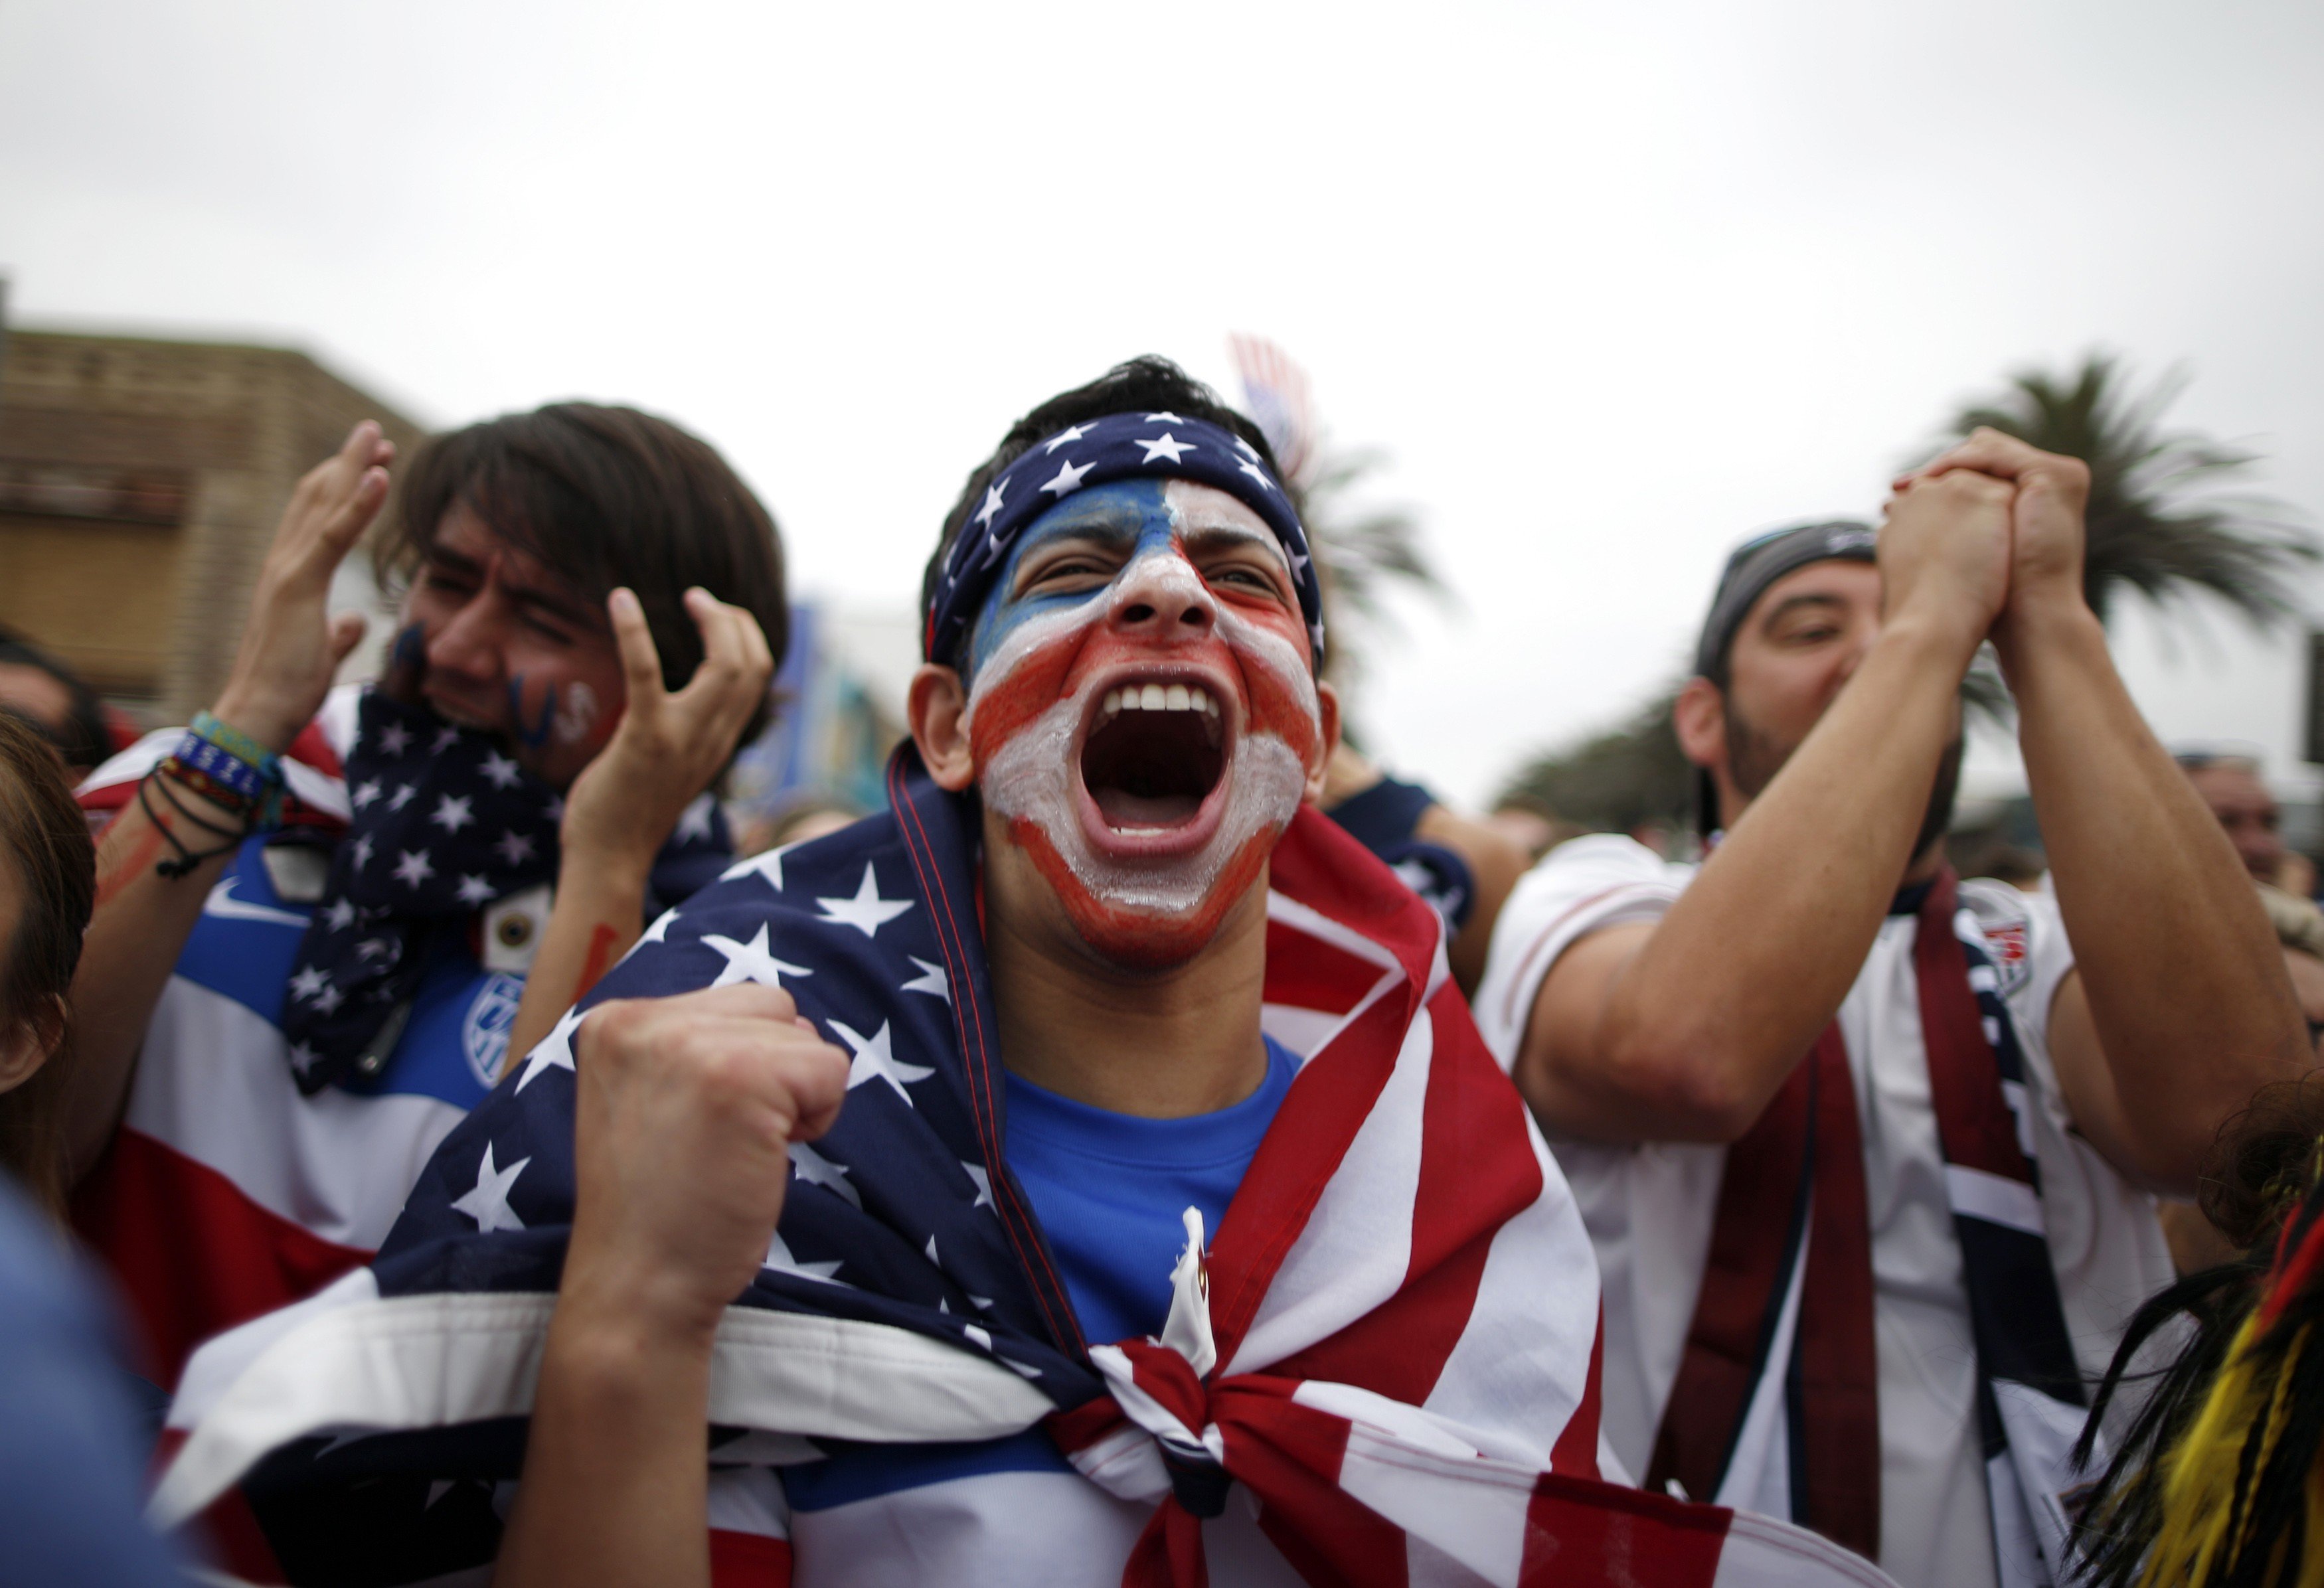 Team U.S.A. fan Gerson Sanchez, 27, during the 2014 World Cup Group G soccer match between Germany and the U.S. at a viewing party in Hermosa Beach, Calif., on June 26, 2014.